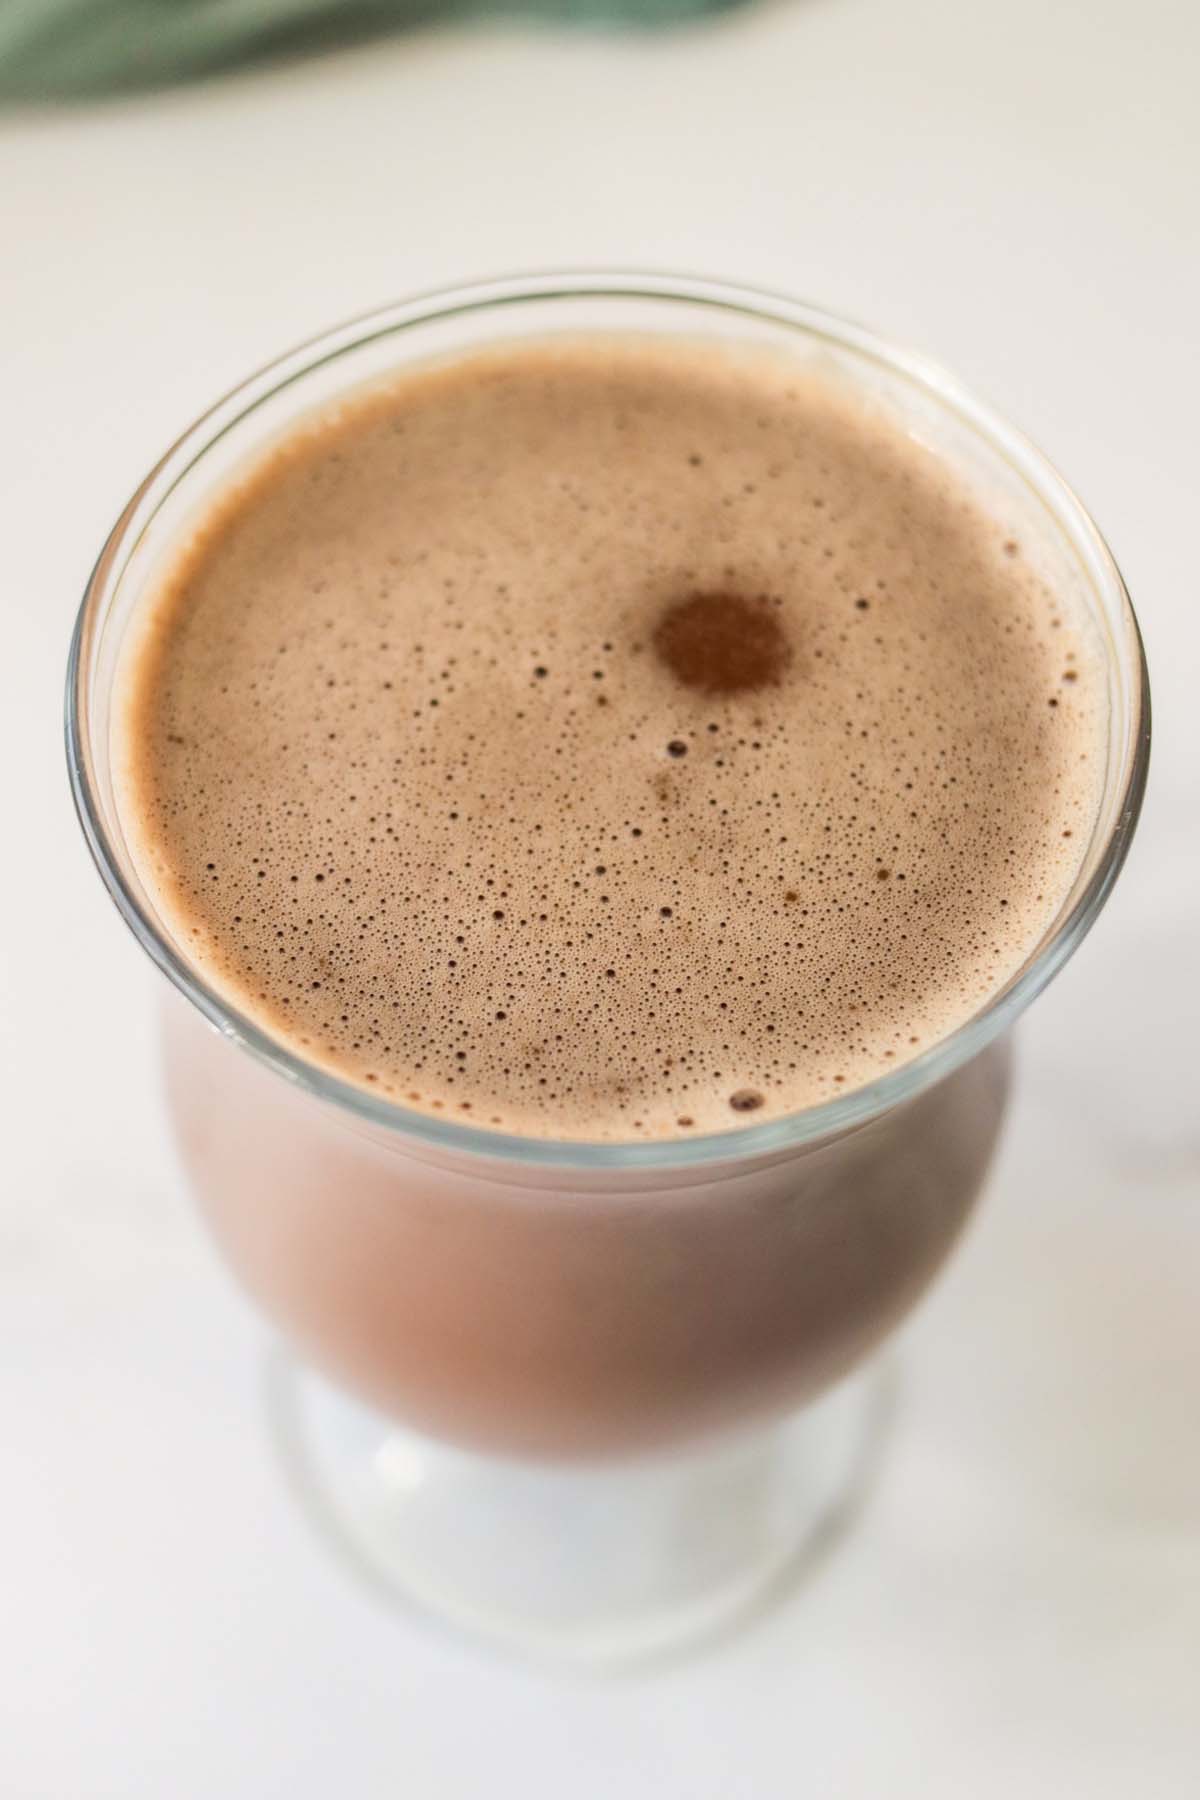 Chocolate milk with foam on top.